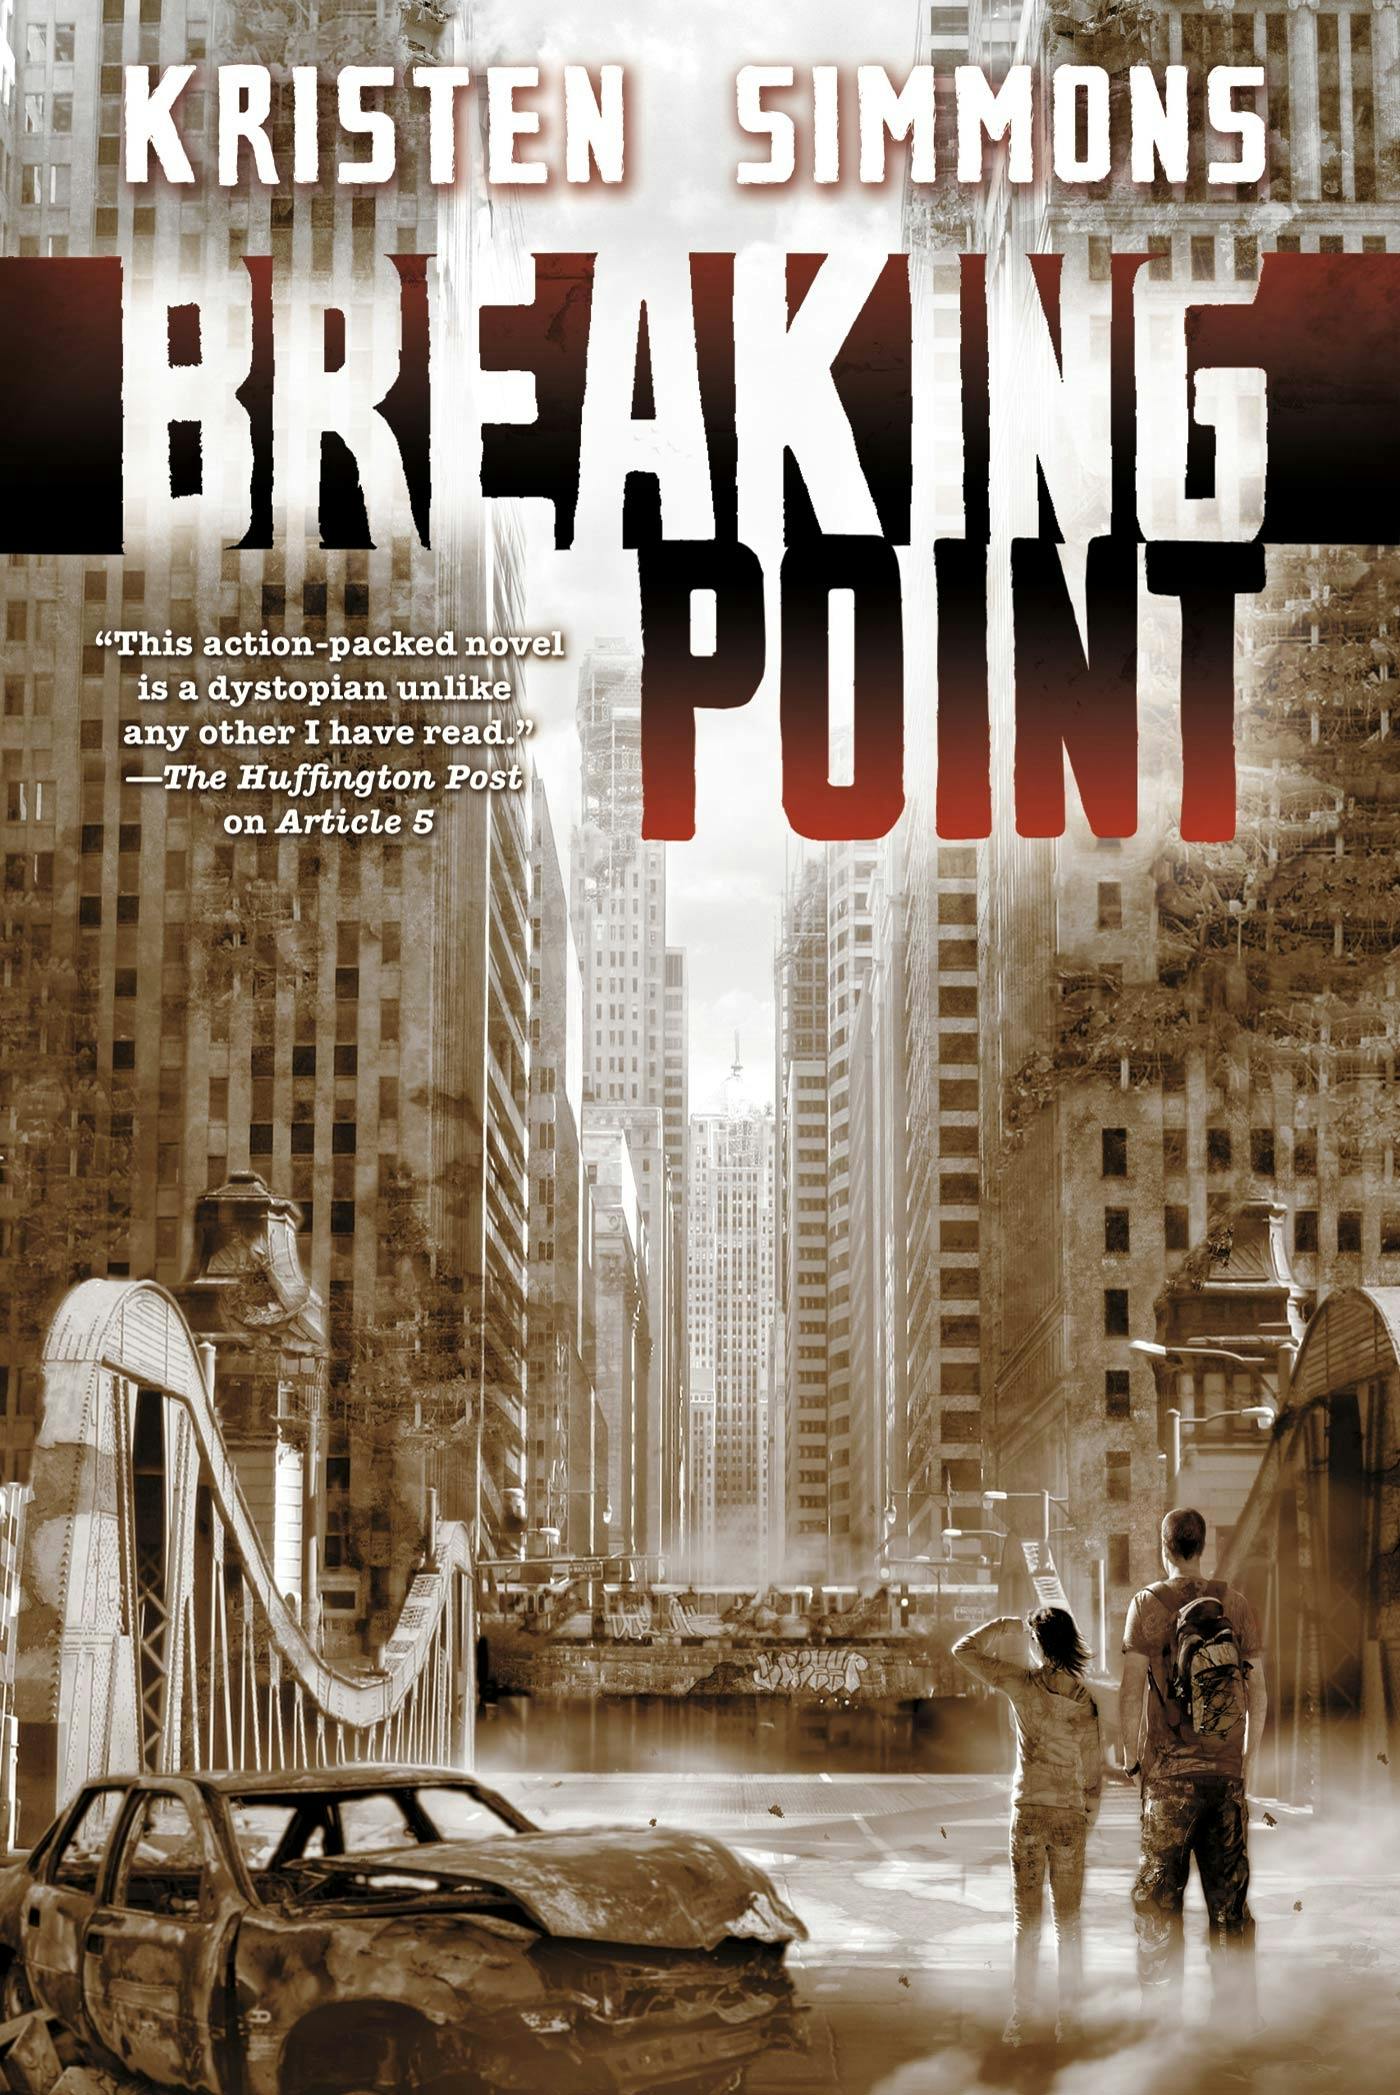 Cover for the book titled as: Breaking Point